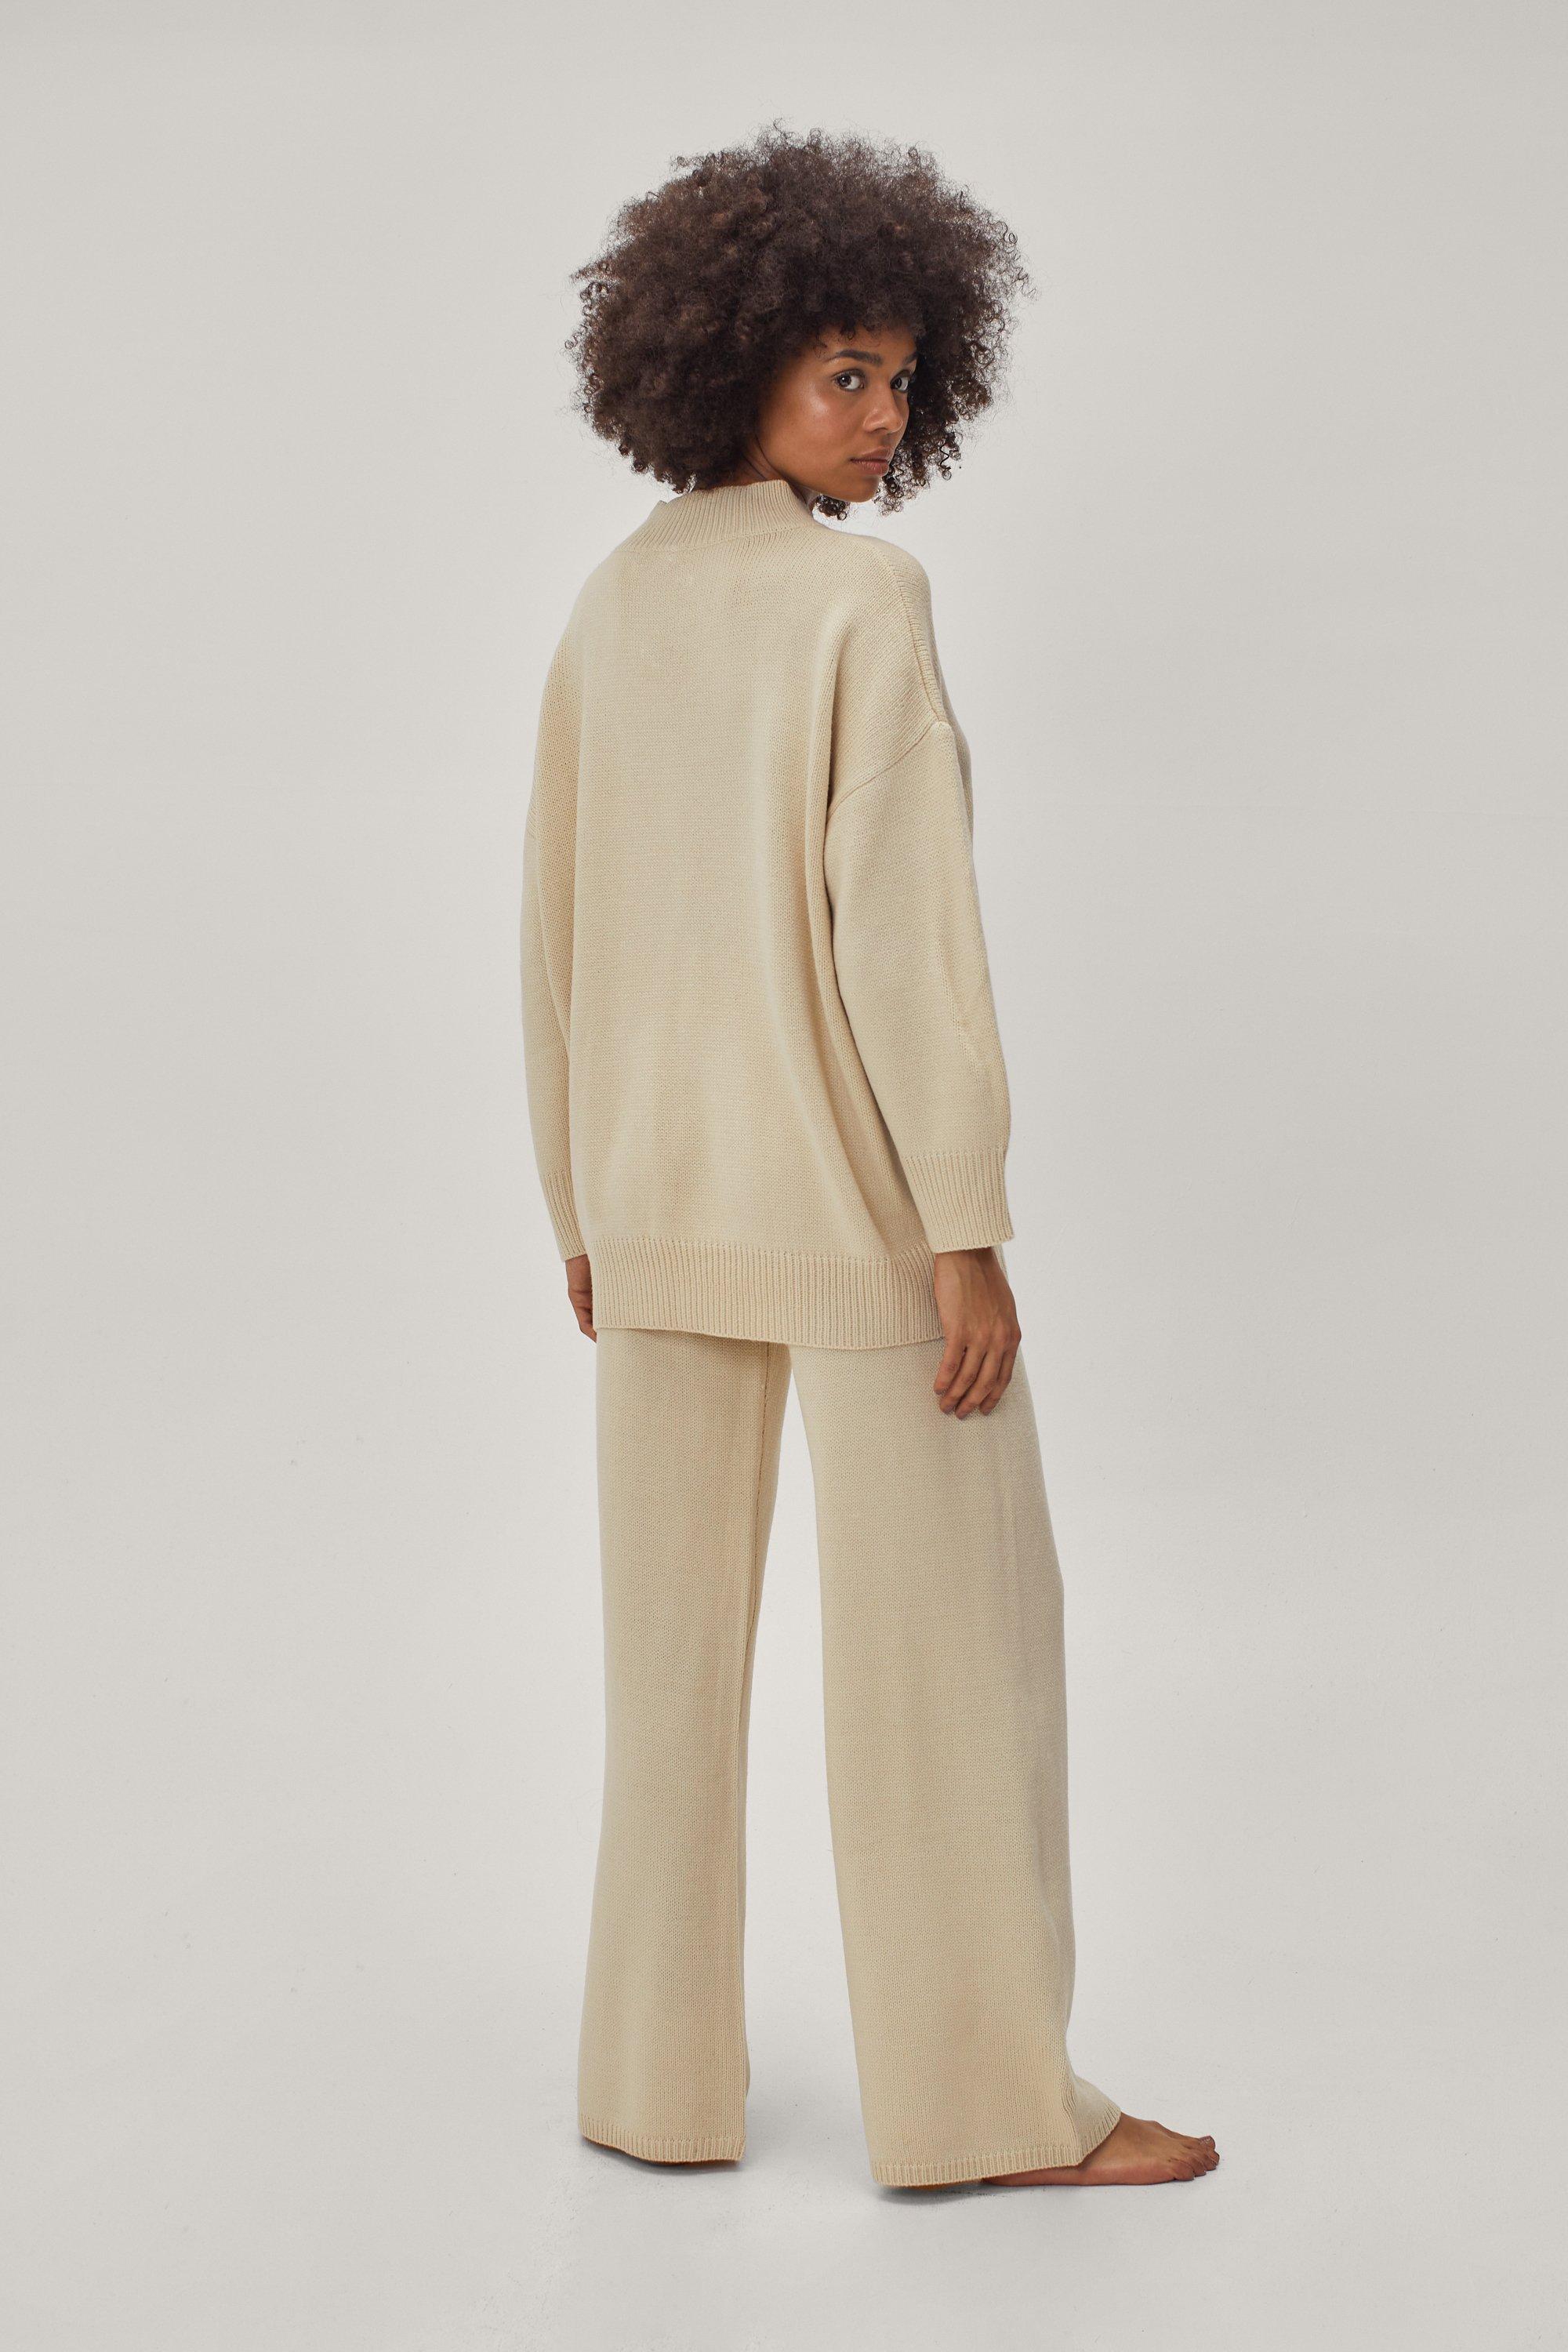 https://media.nastygal.com/i/nastygal/agg15161_cream_xl_2/knitted-sweater-and-wide-leg-pants-lounge-set